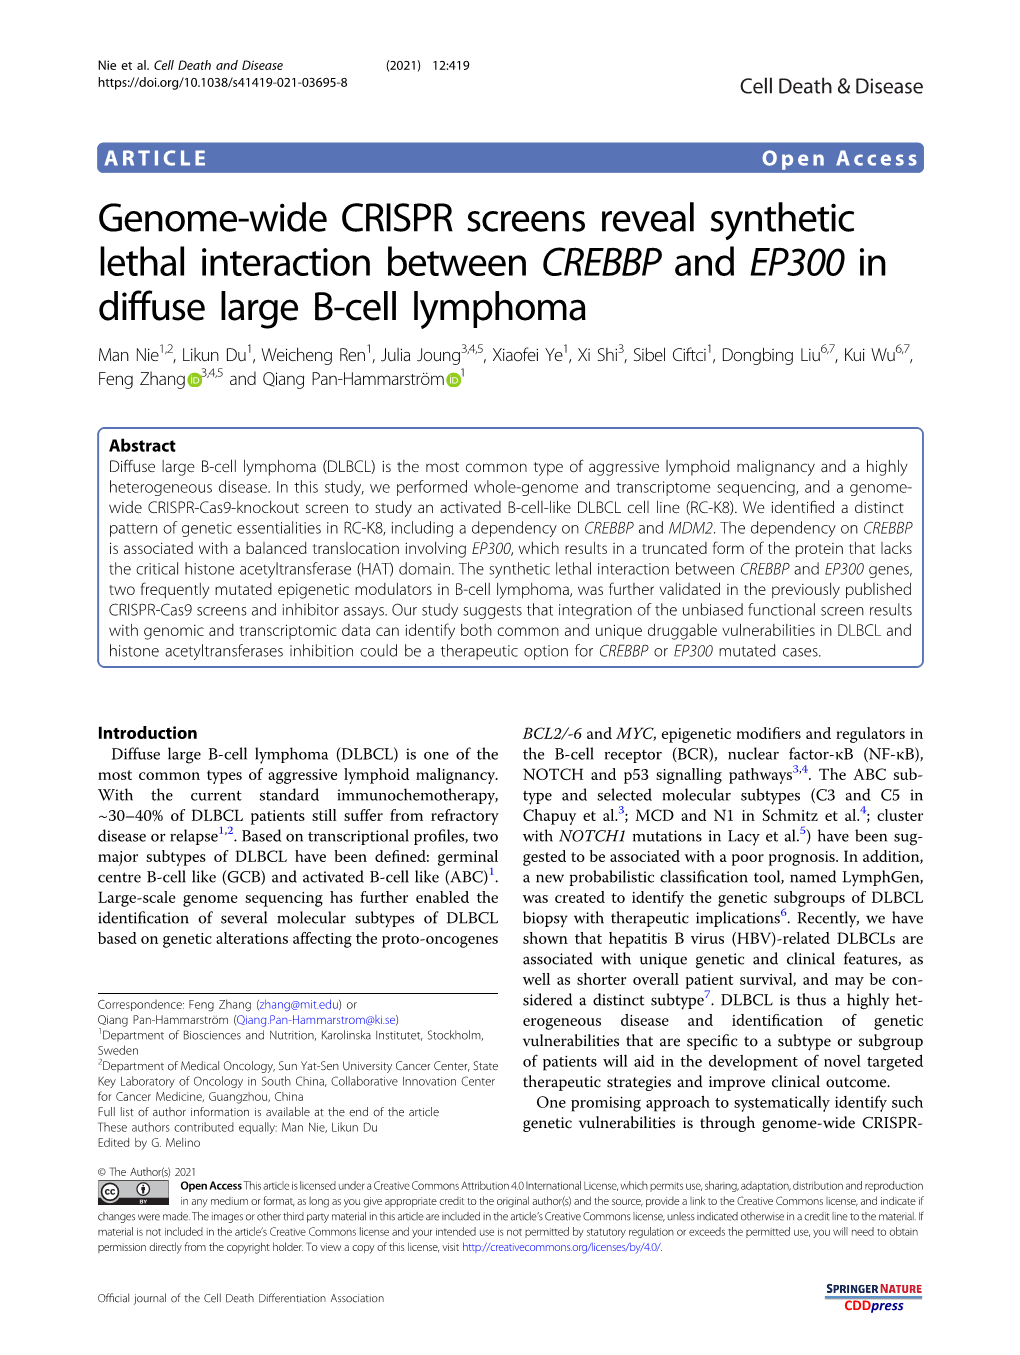 Genome-Wide CRISPR Screens Reveal Synthetic Lethal Interaction